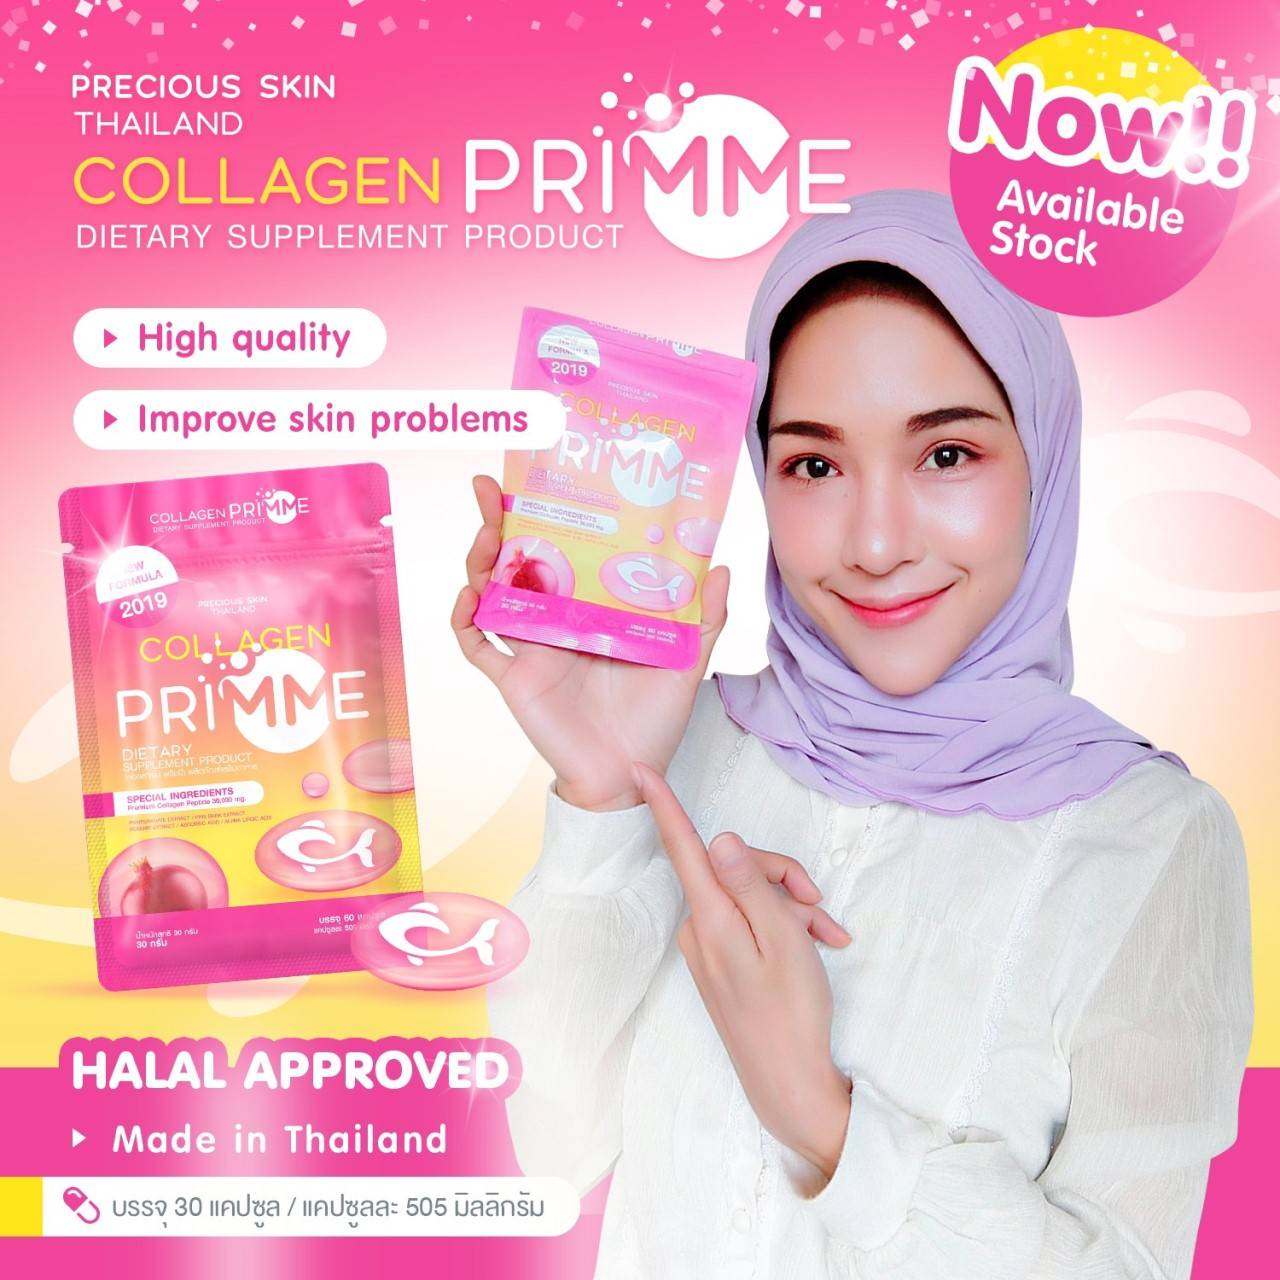 COLLAGEN PRIMME (60 CAPSULES) REDUCE ACNE AND SCARS WHITE FACE SKIN by "www.ccthaitown.com"